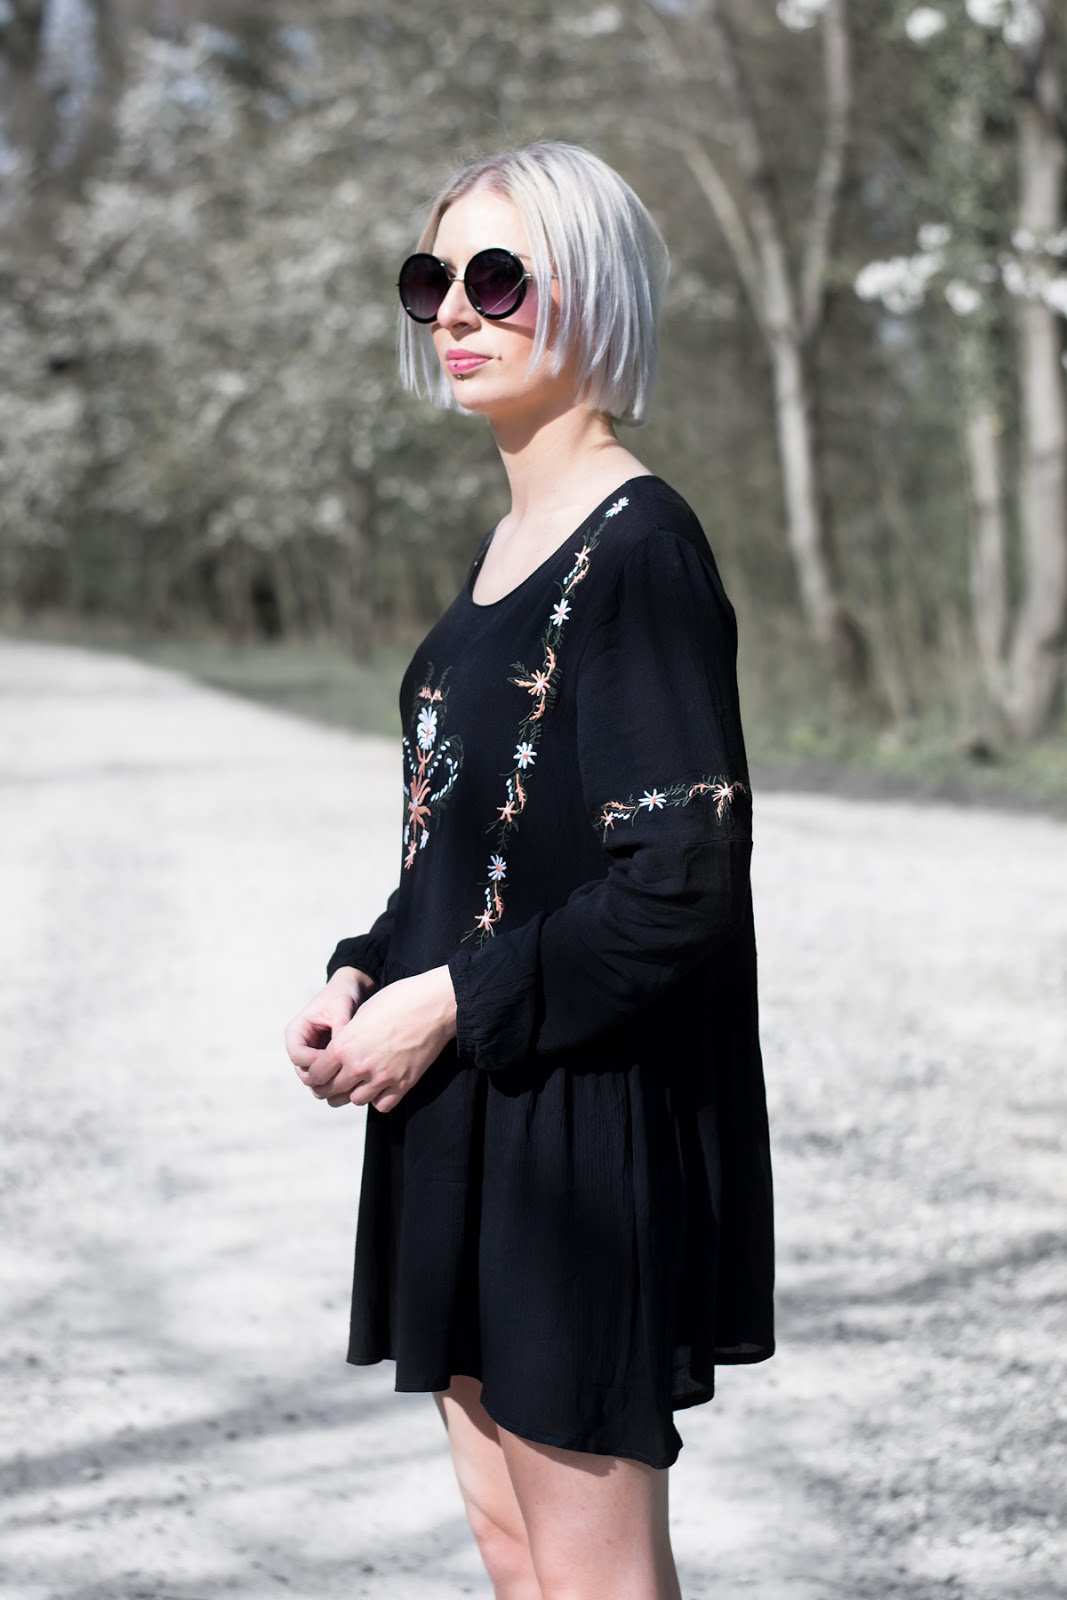 Moth clothing, embroidered skater dress, round sunglasses primark, SS17 outfit